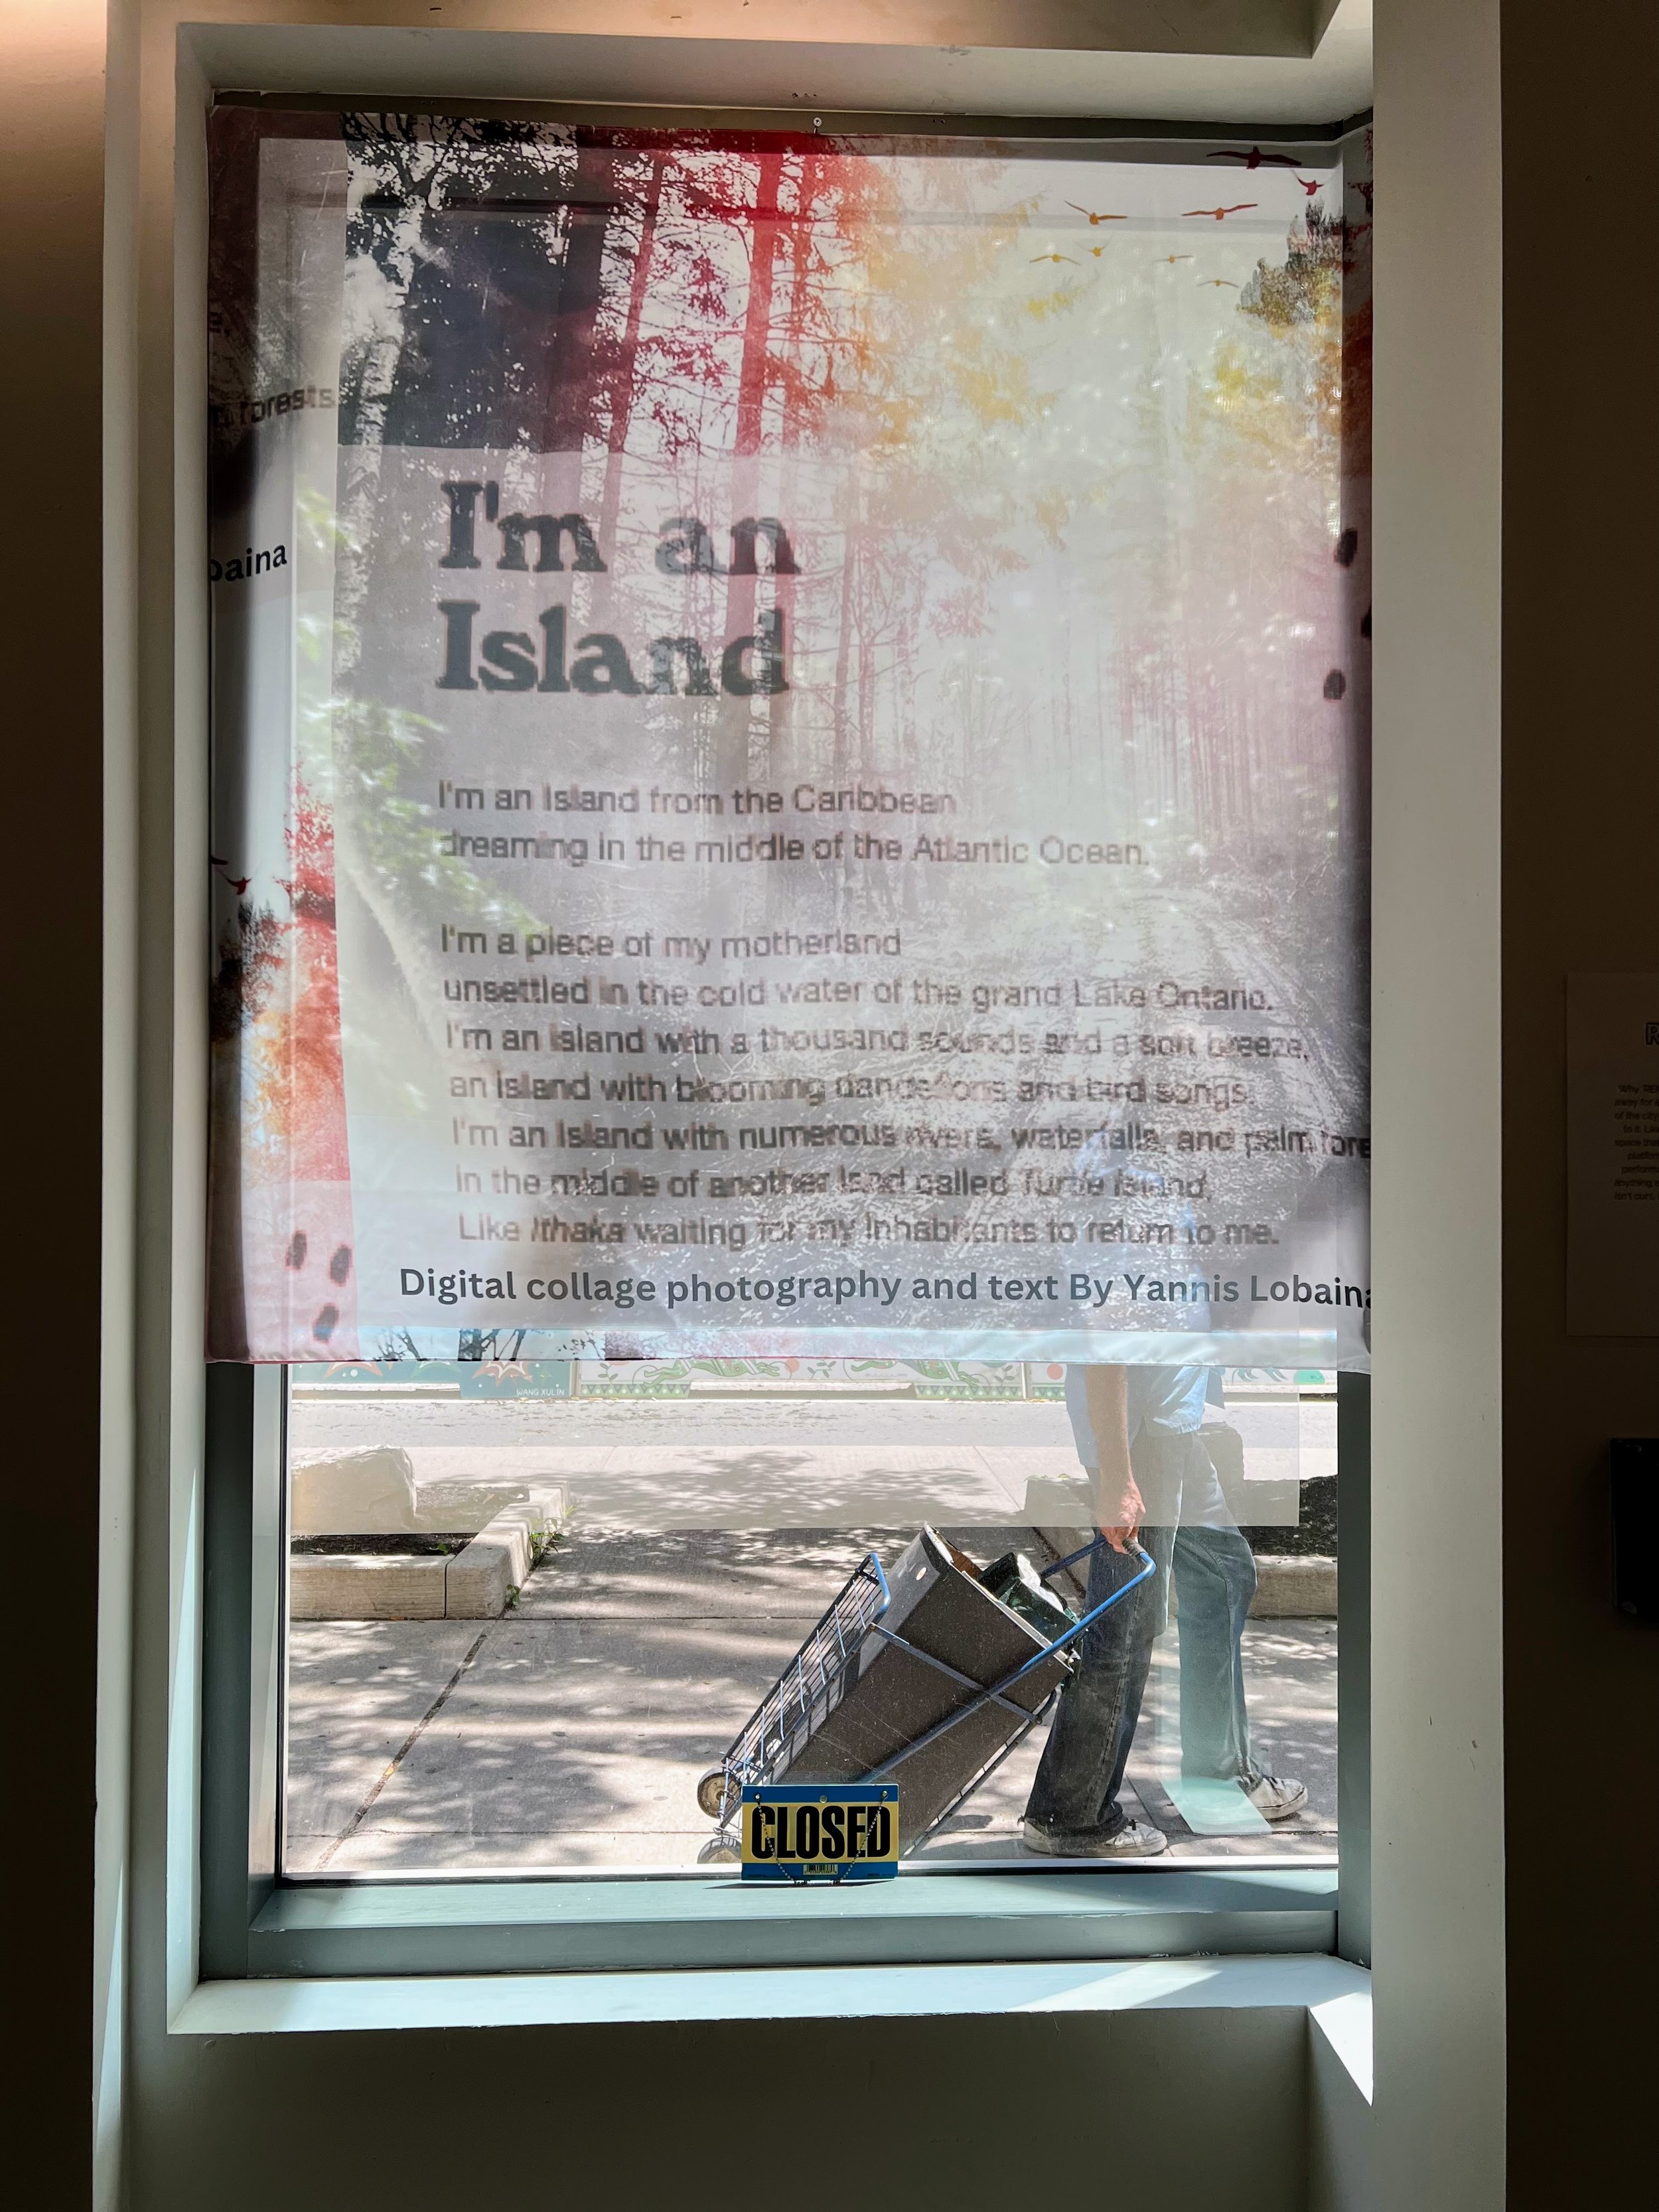 SET UP OF I_M AN ISLAND AT THE WINDOW BY YANNIS LOBAINA.jpg